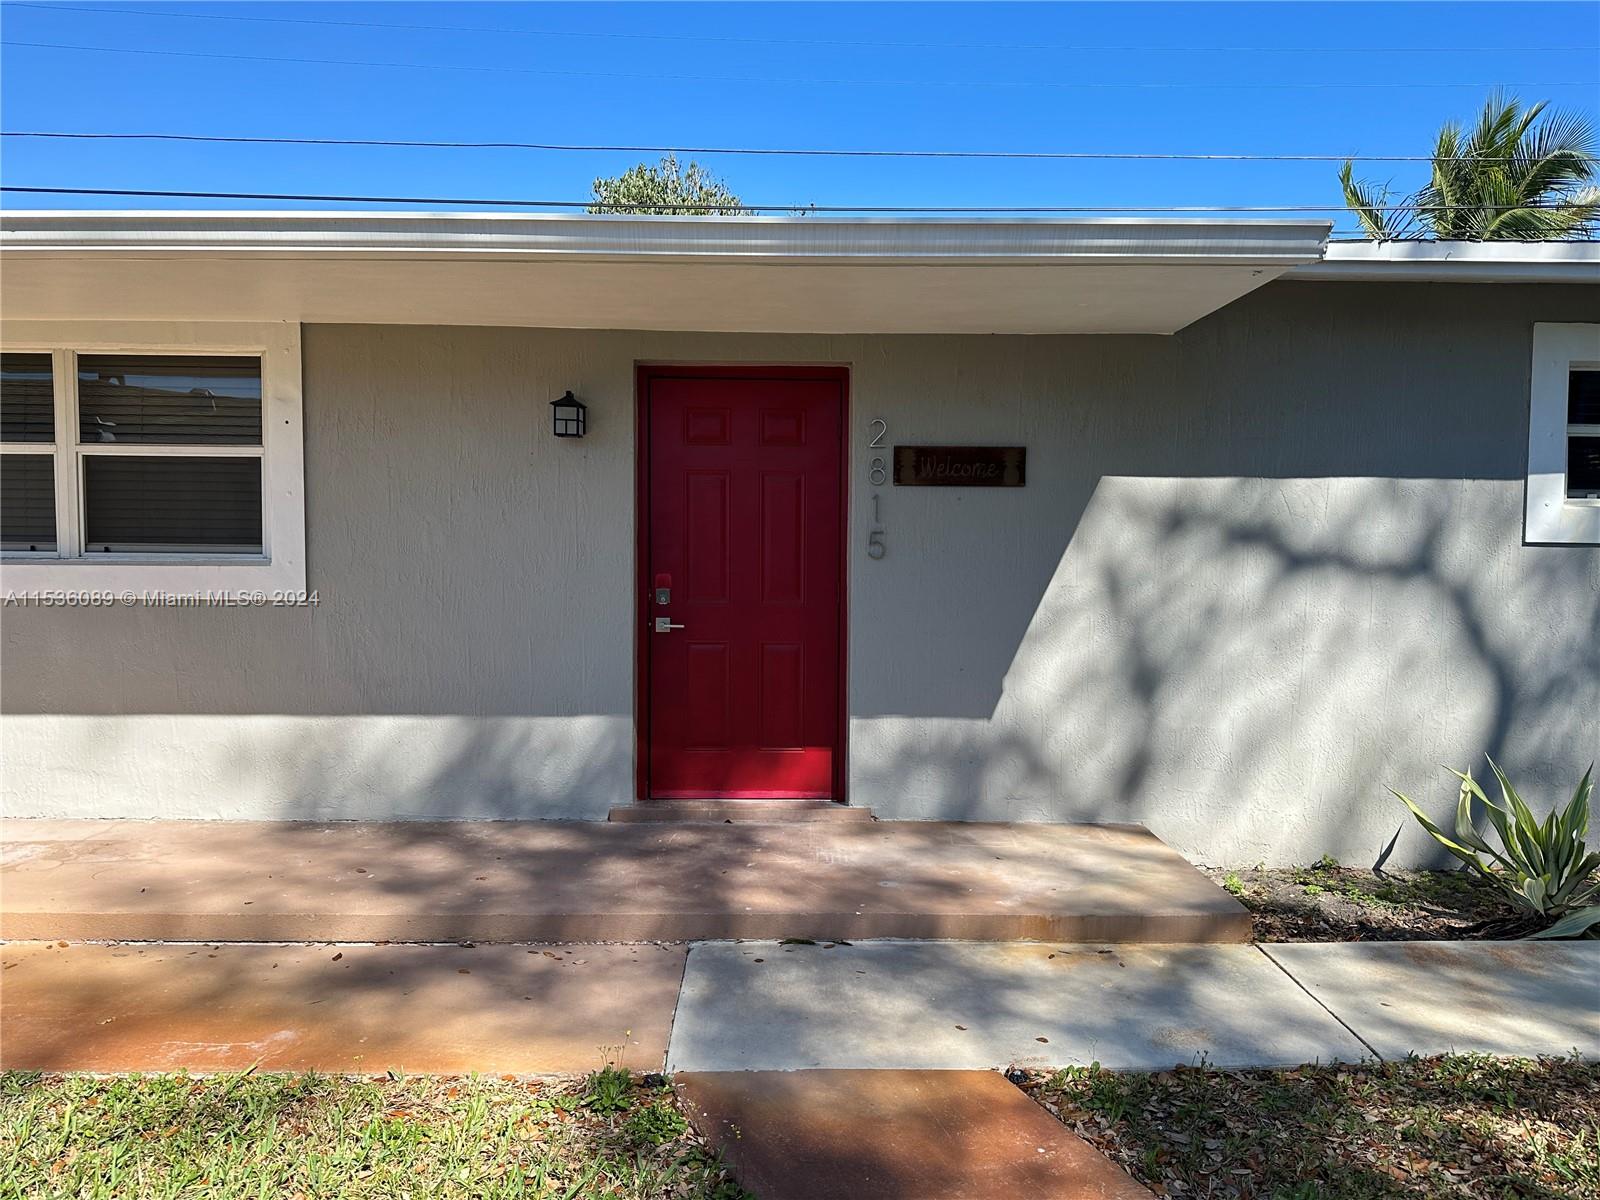 Convenient and centrally located, this spacious 1 bedroom offers comfort and accessibility in a well-maintained multi-family home. Minutes from hospitals and highways. Don't miss out on making this your home sweet home! No HOA!